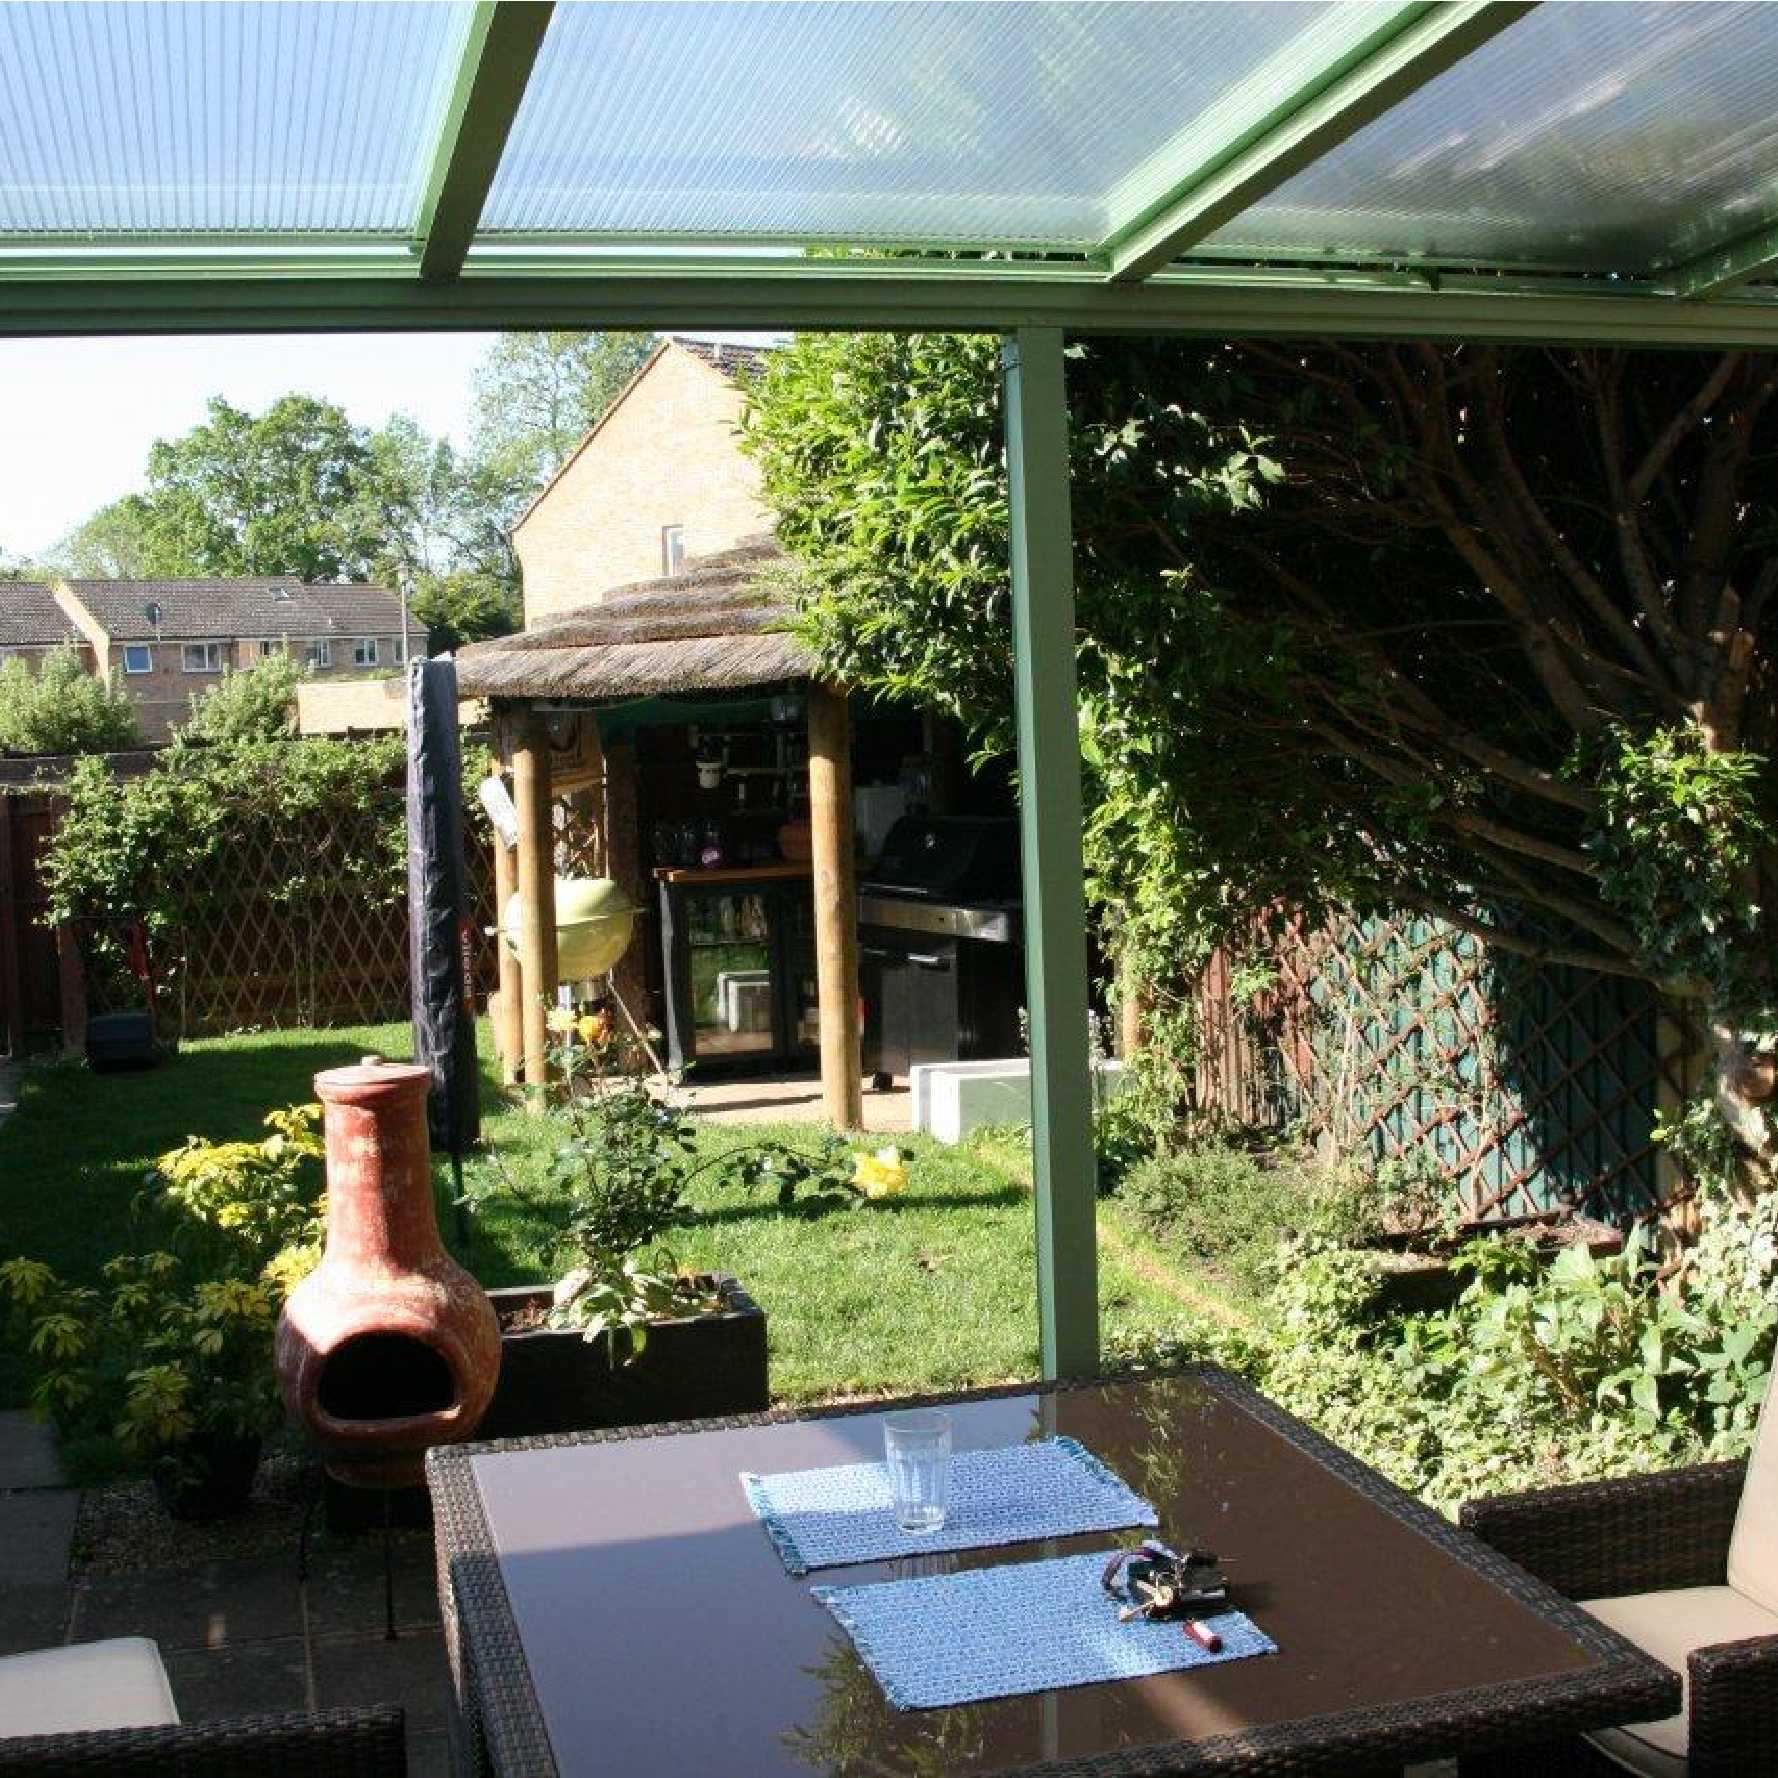 Affordable Omega Smart Lean-To Canopy, White with 16mm Polycarbonate Glazing - 2.1m (W) x 4.0m (P), (2) Supporting Posts